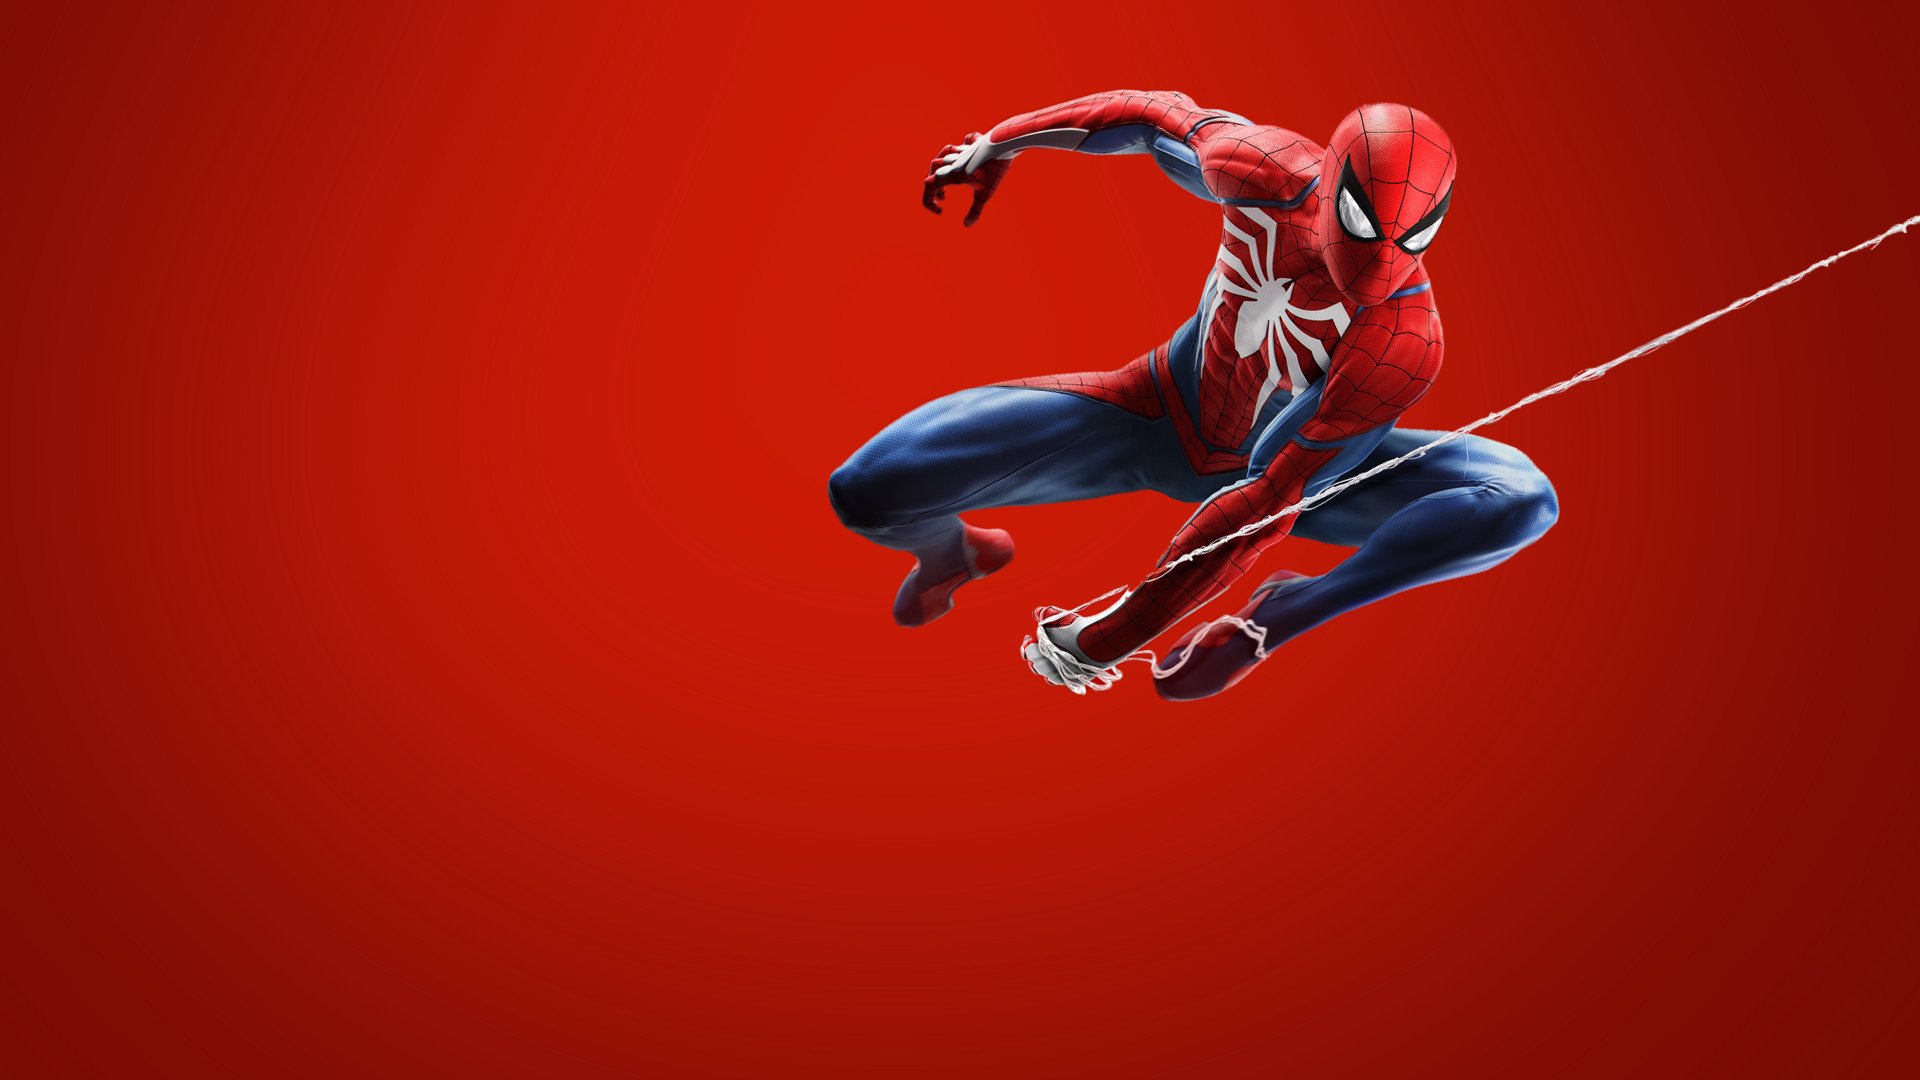 I tried to make a SpidermanPS4 wallpaper